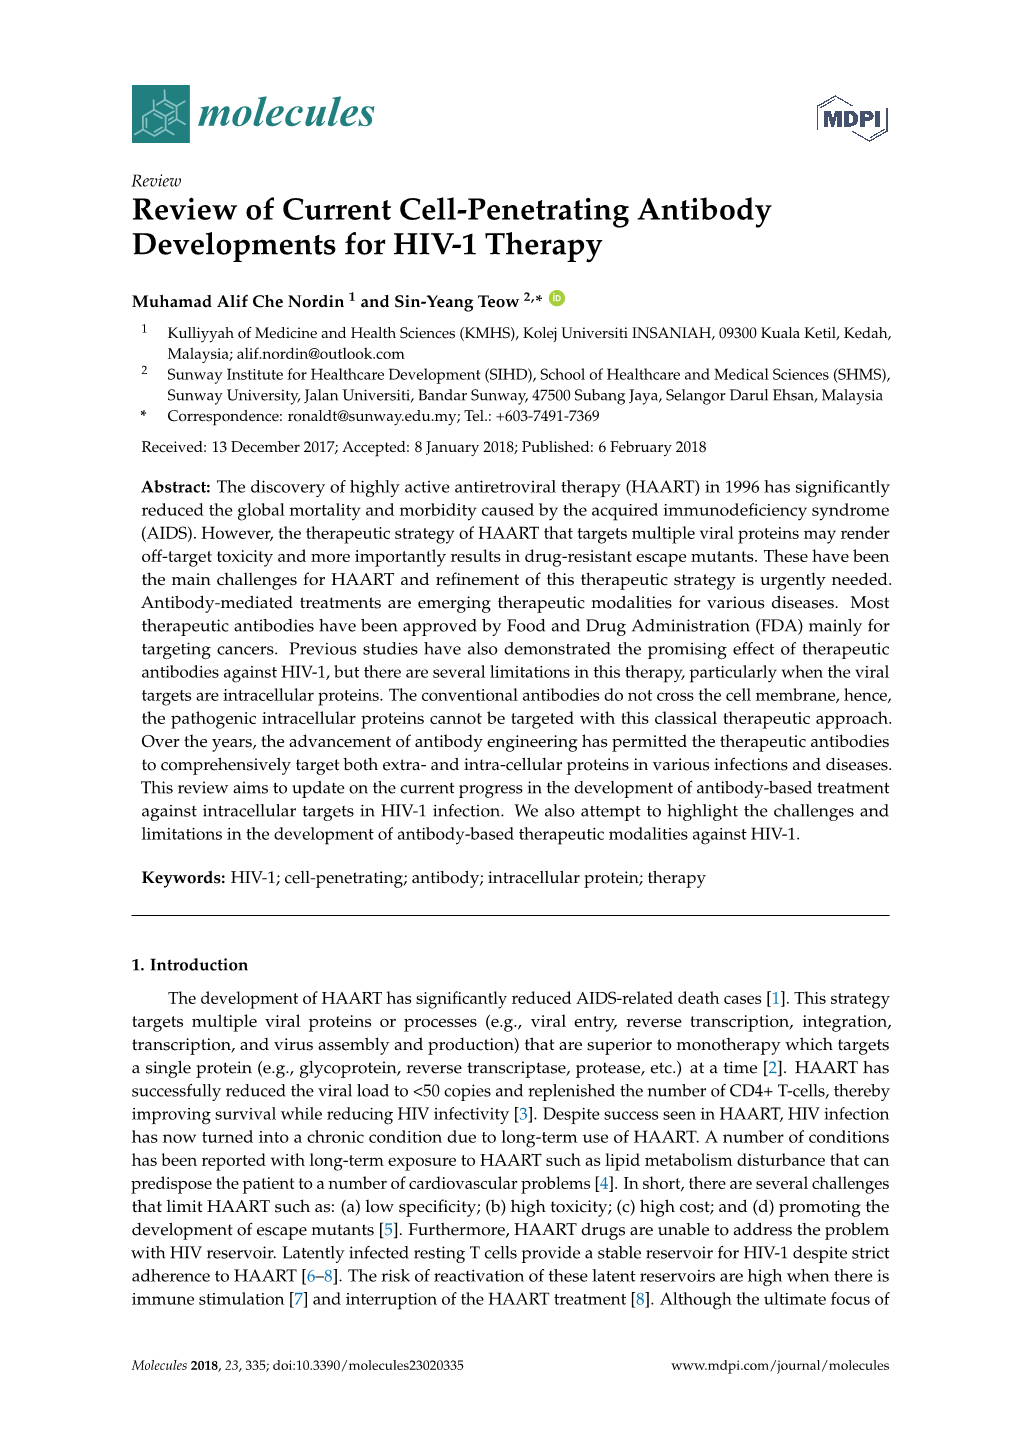 Review of Current Cell-Penetrating Antibody Developments for HIV-1 Therapy